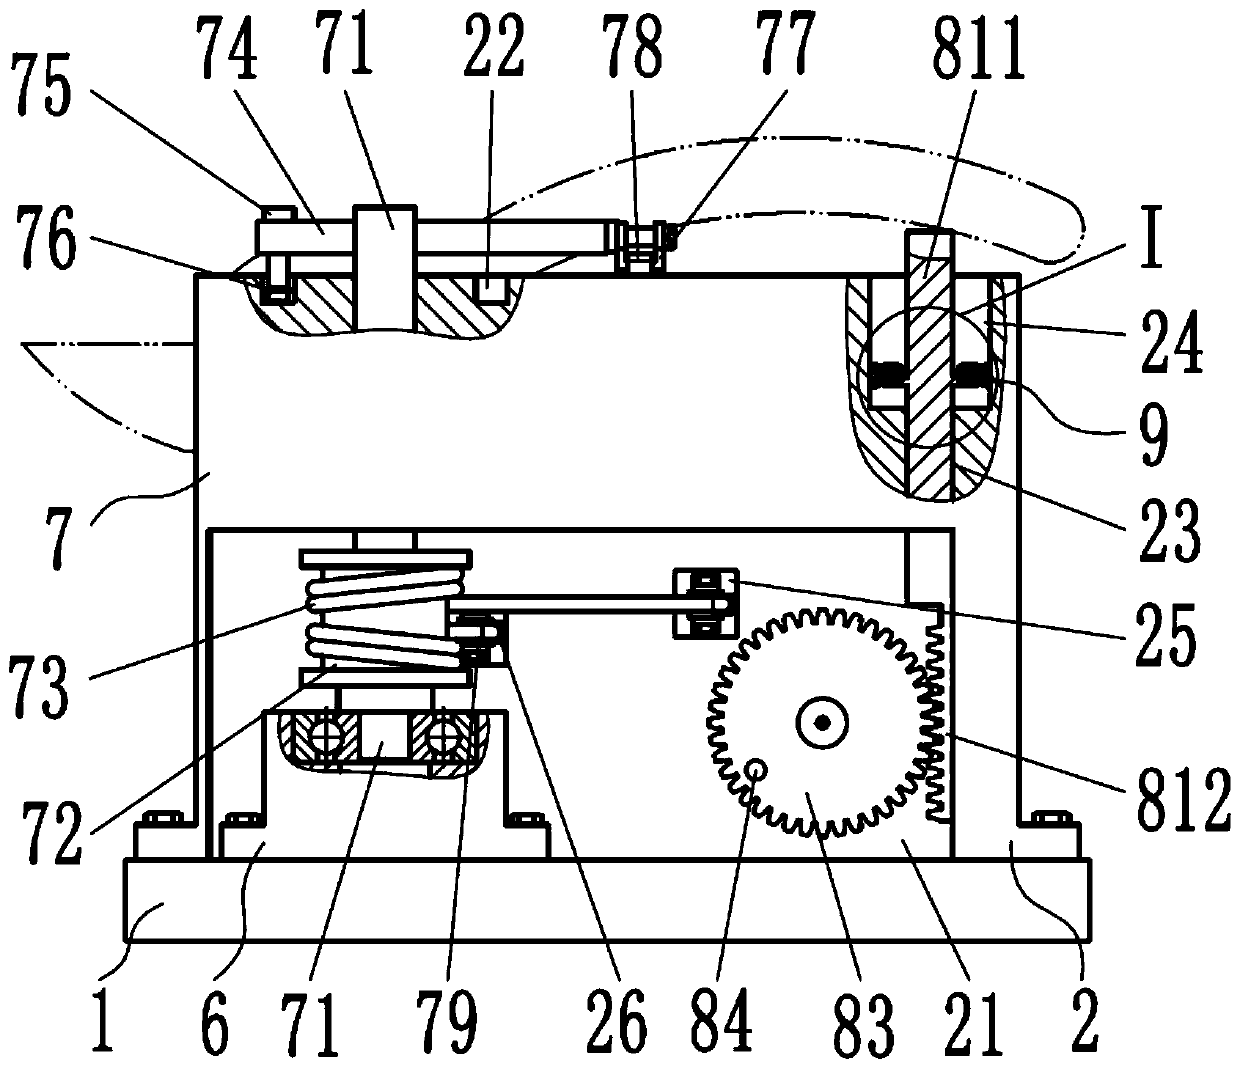 A milling equipment for inner and outer cutting edges of diagonal pliers